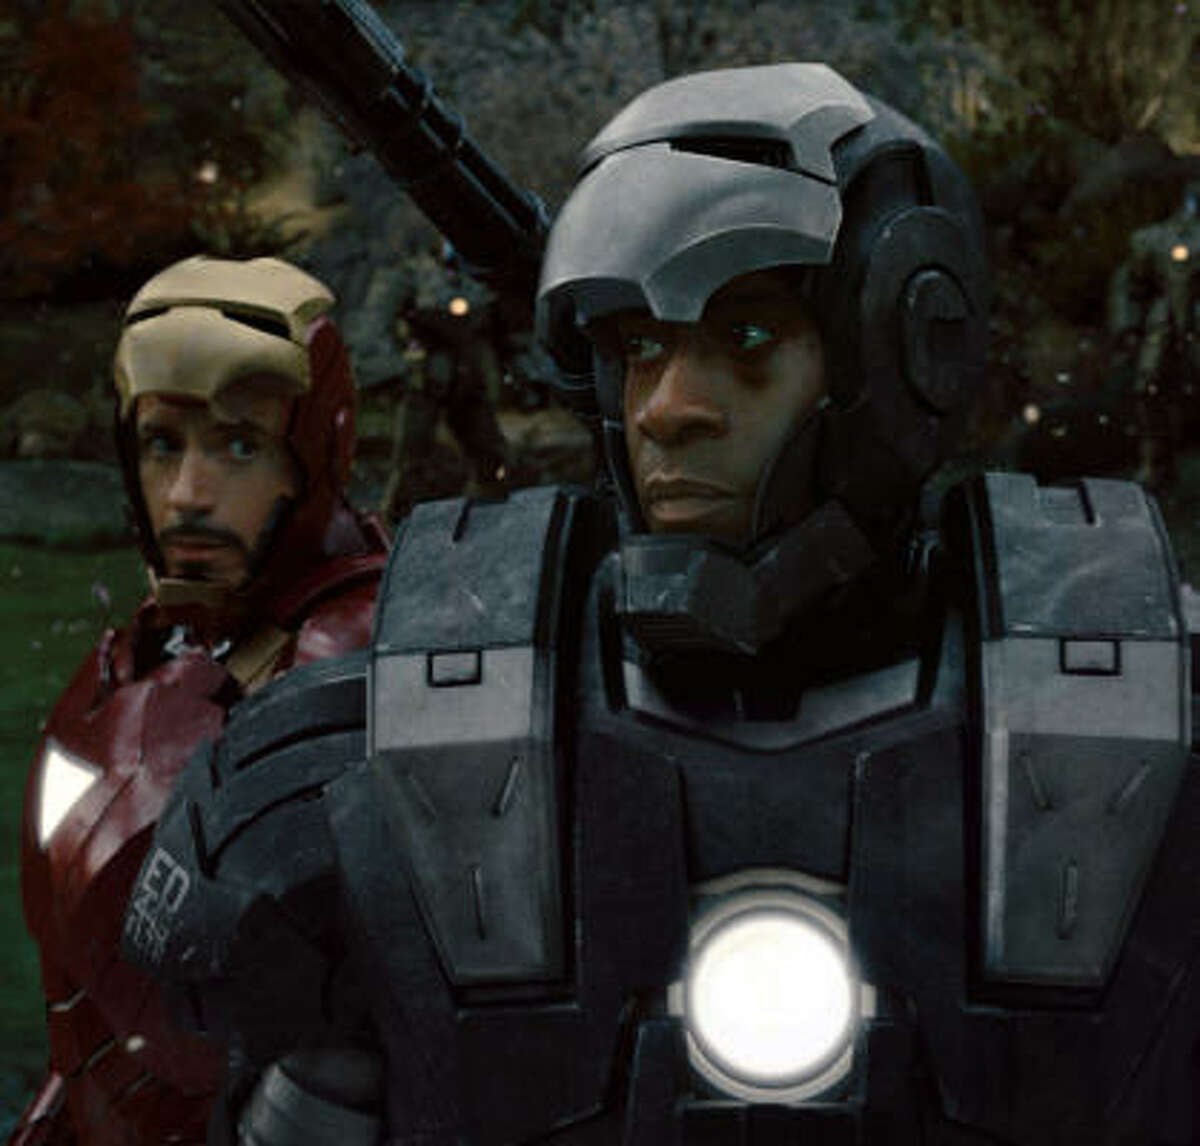 In Iron Man 2, Col. James “Rhodey” Rhodes, played by Don Cheadle, right, must balance his sense of duty to the military and his loyalty to friend Tony Stark (Robert Downey Jr.).